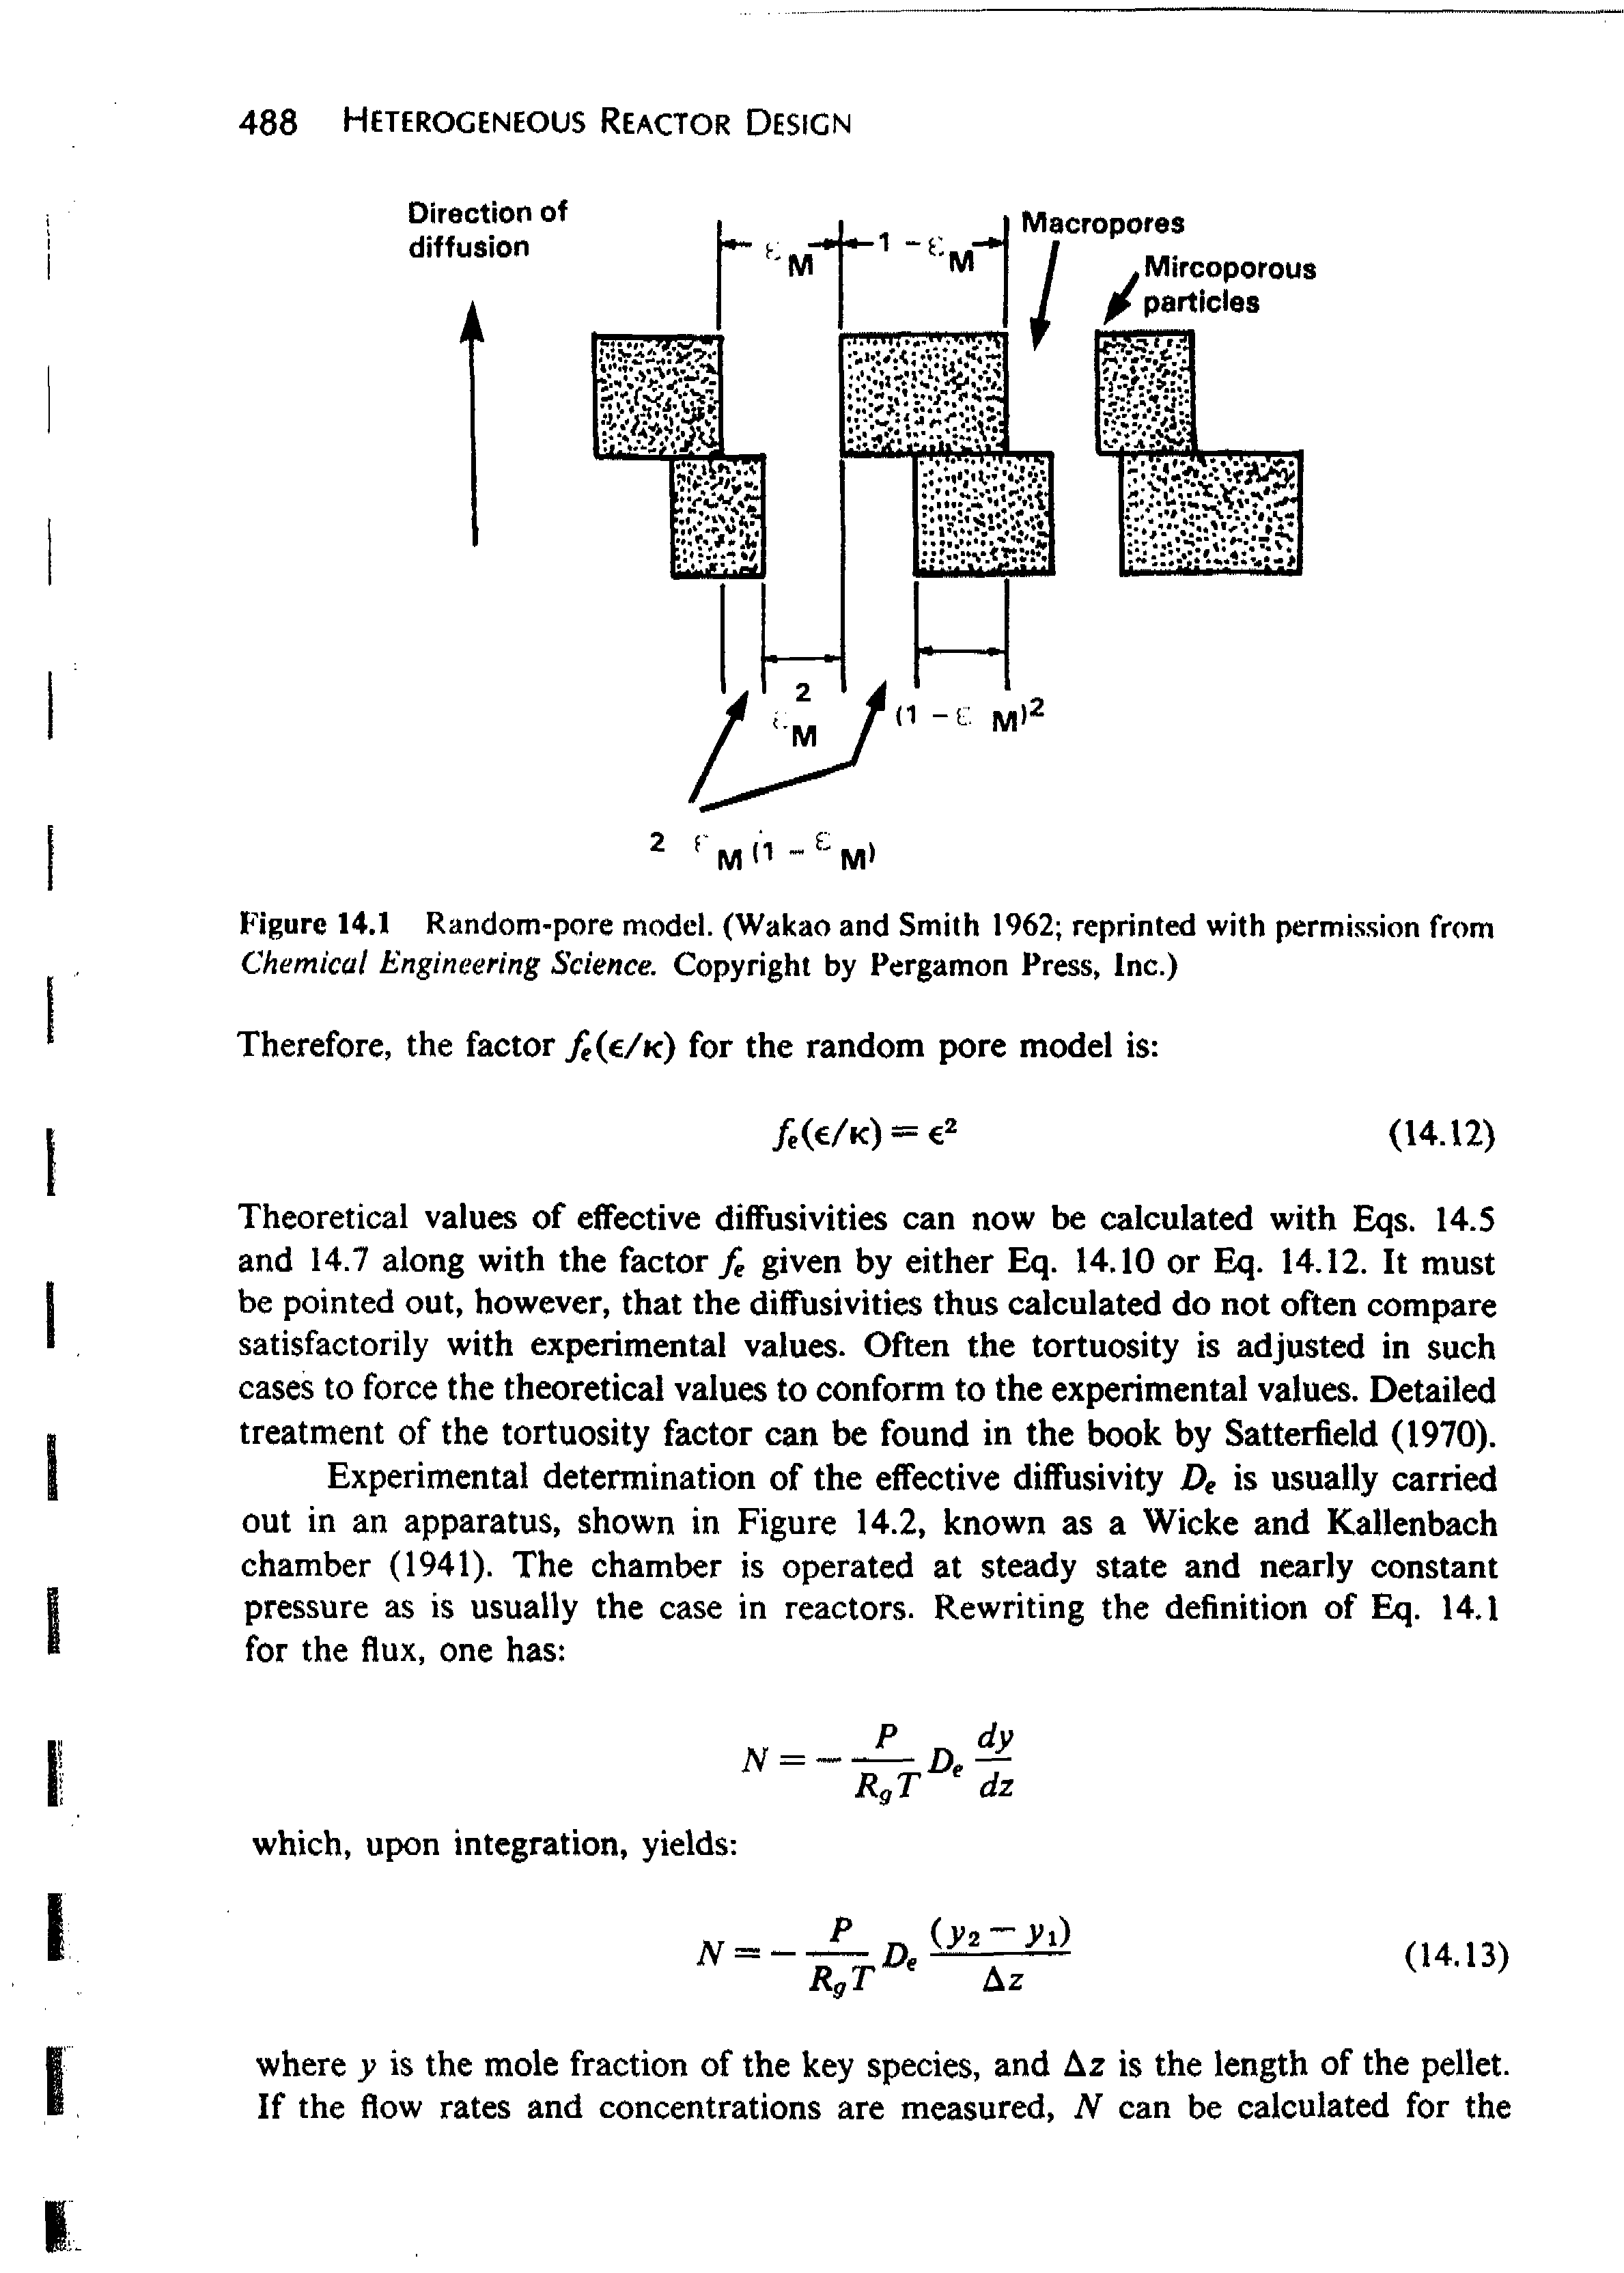 Figure 14.1 Random-pore model. (Wakao and Smith 1962 reprinted with permission from Chemical Engineering Science. Copyright by Pergamon Press, Inc.)...